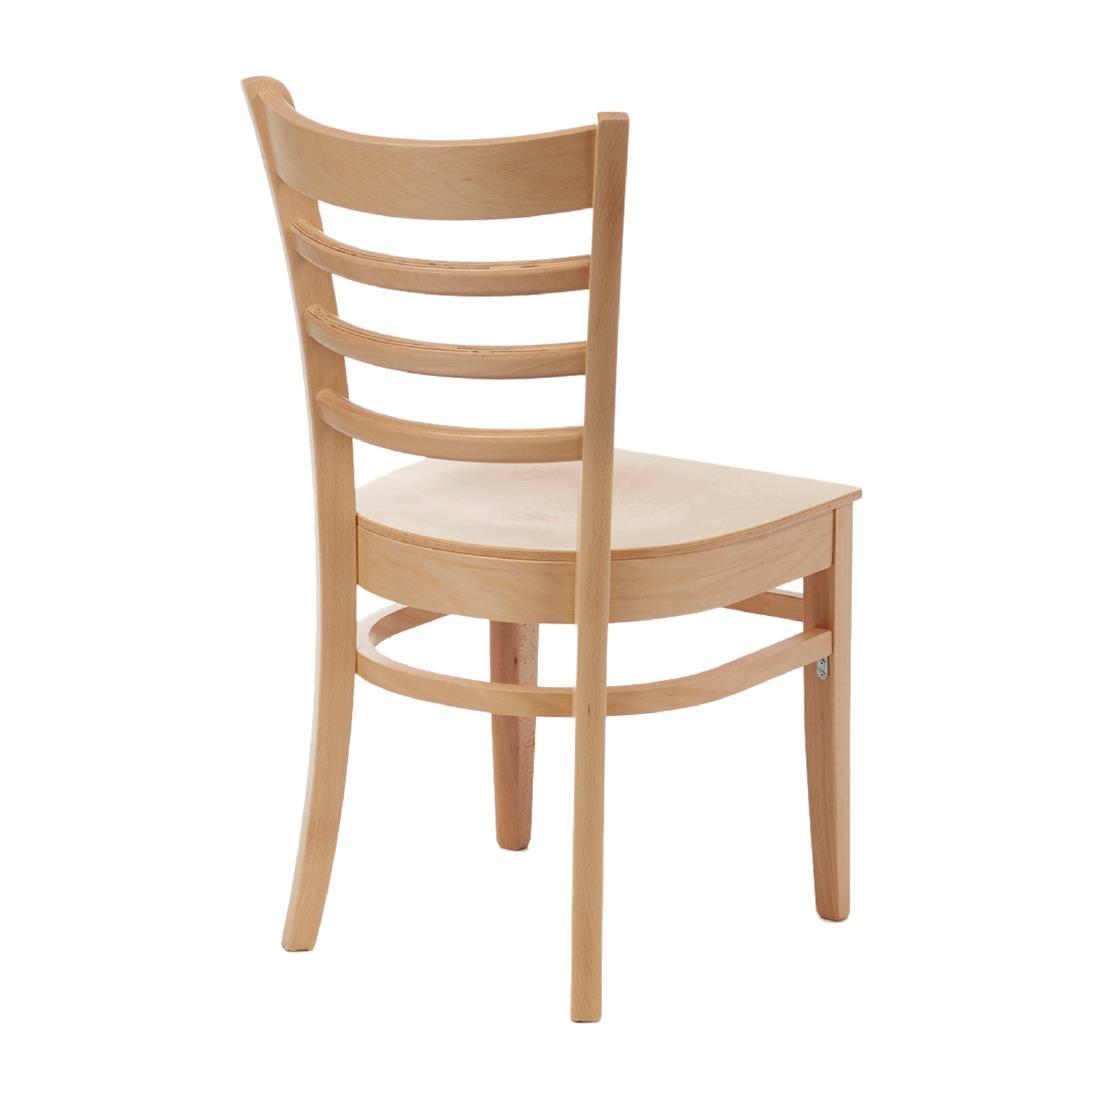 Fameg Slatted Side Chairs Natural Beech (Pack of 2) - CD184-PL  - 2